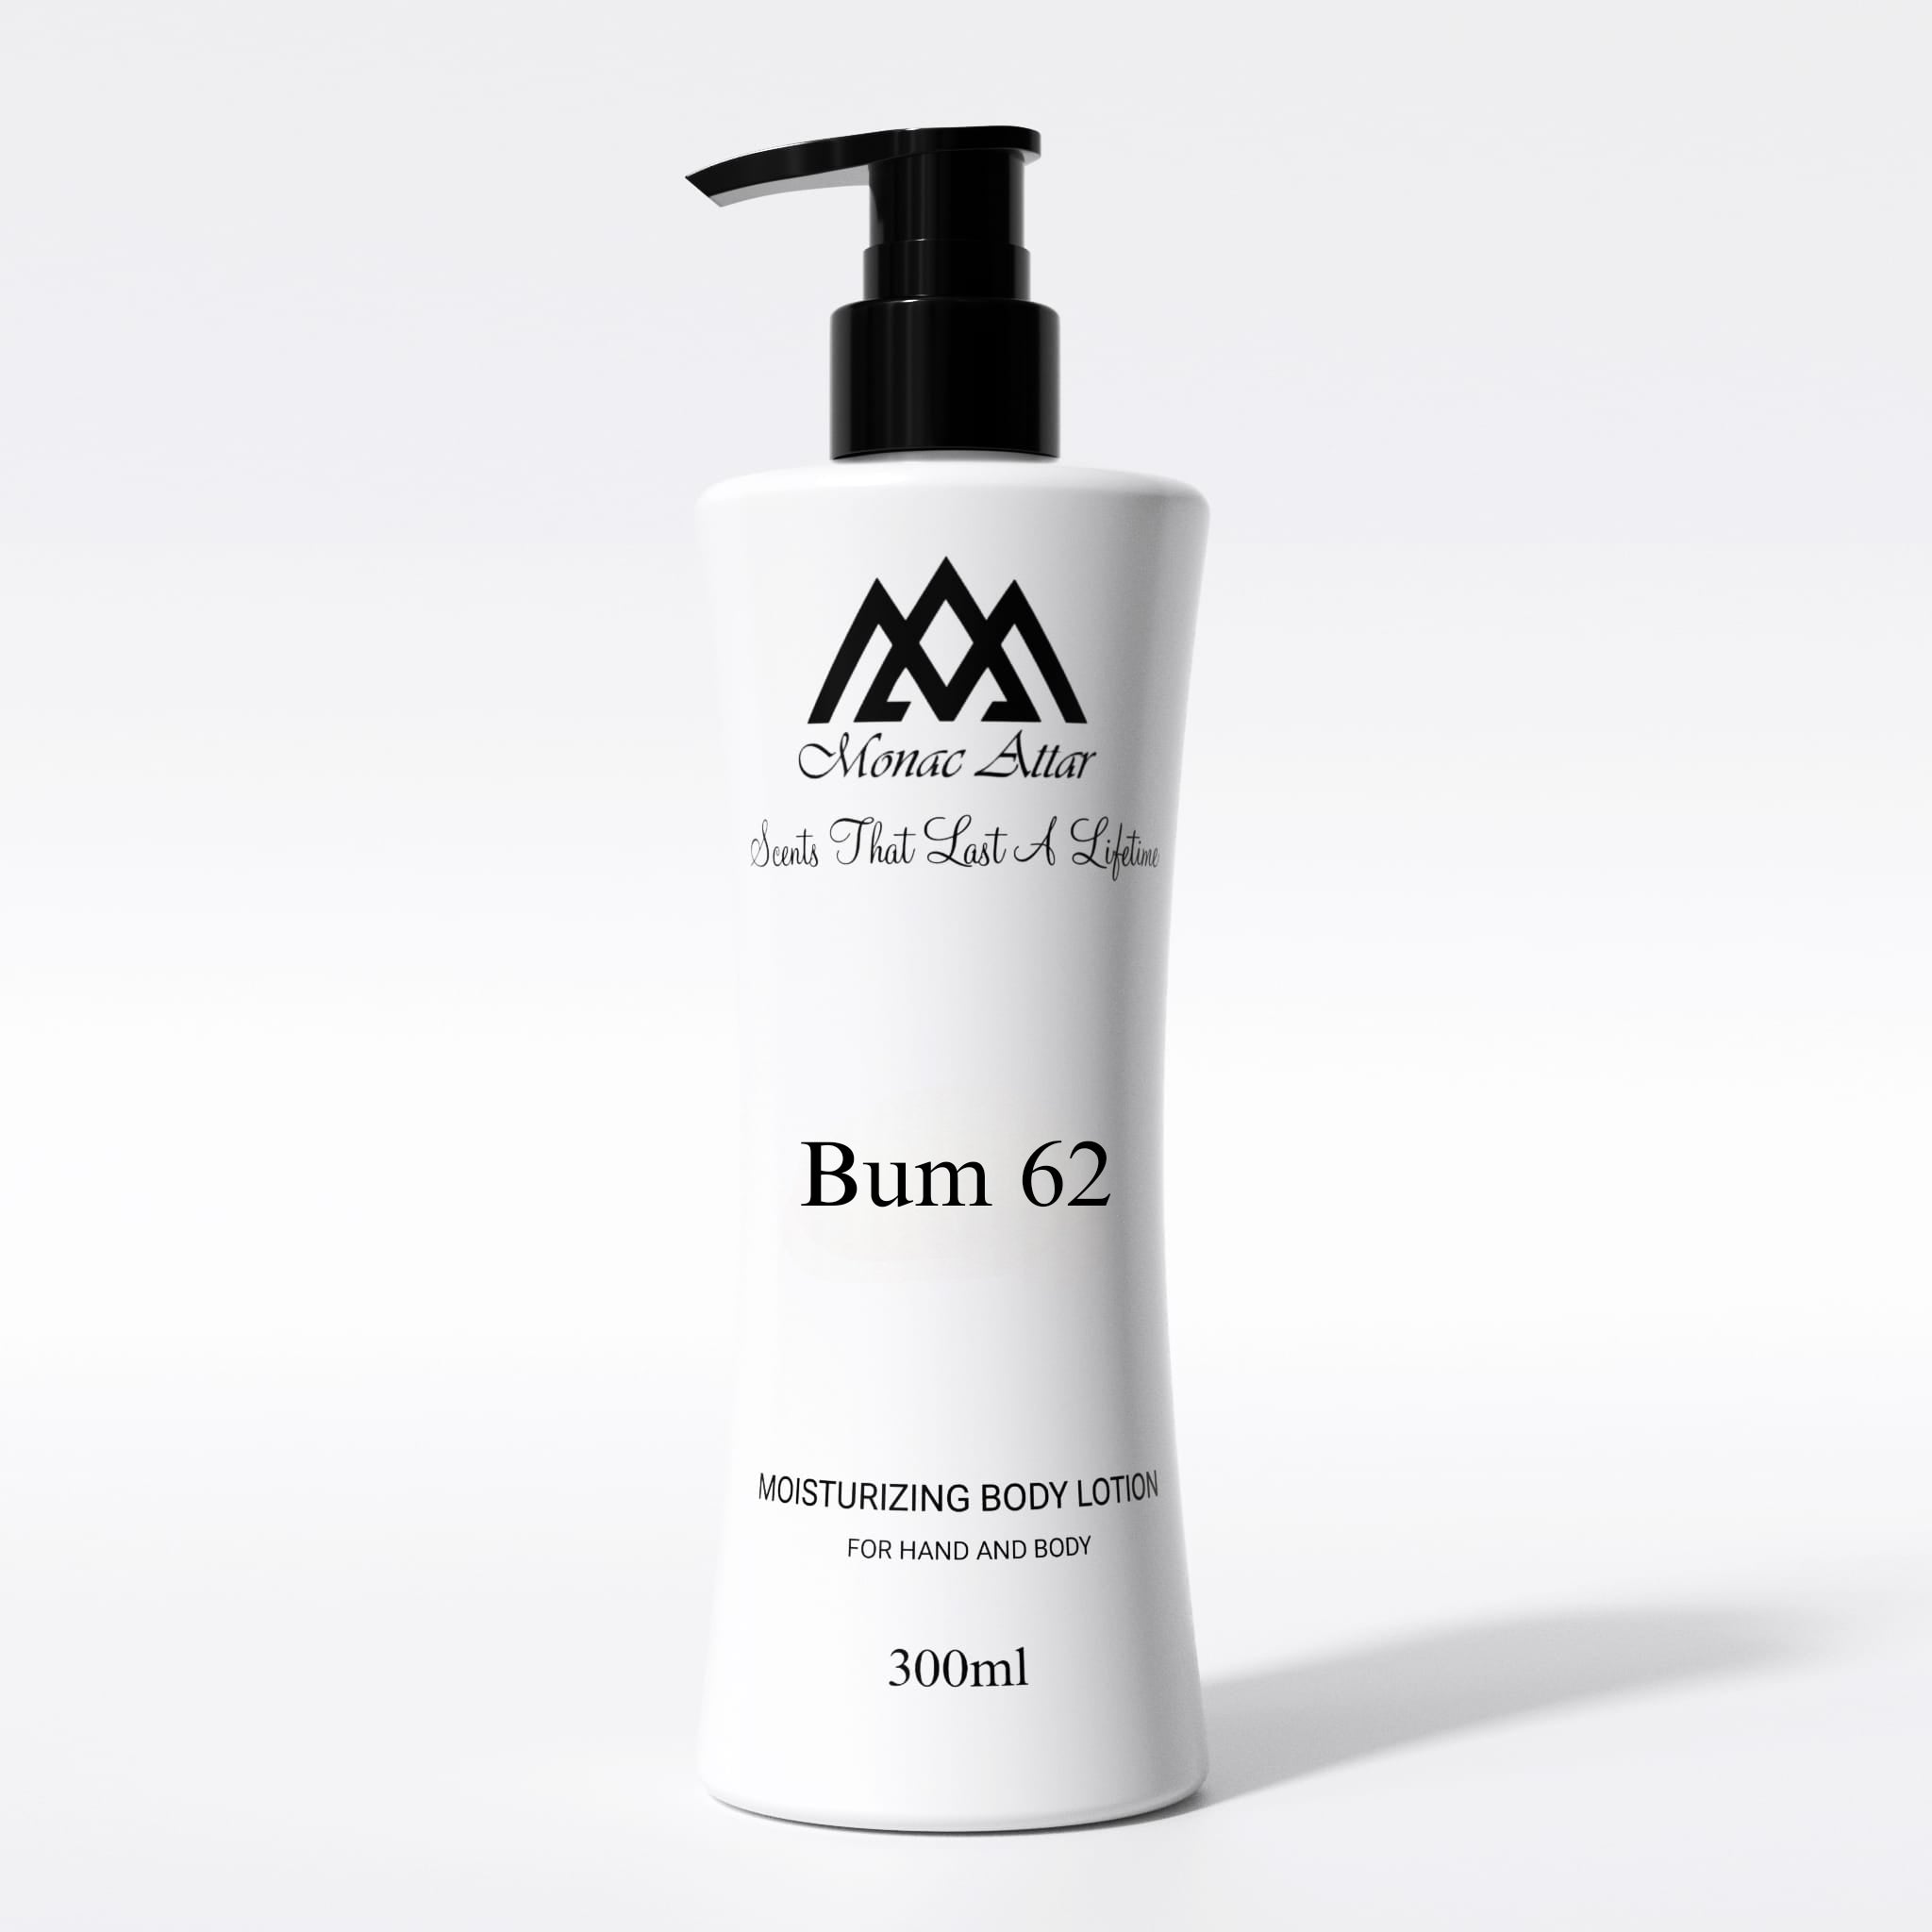 Bum 62 Body Lotion Inspired by Cheirosa 62